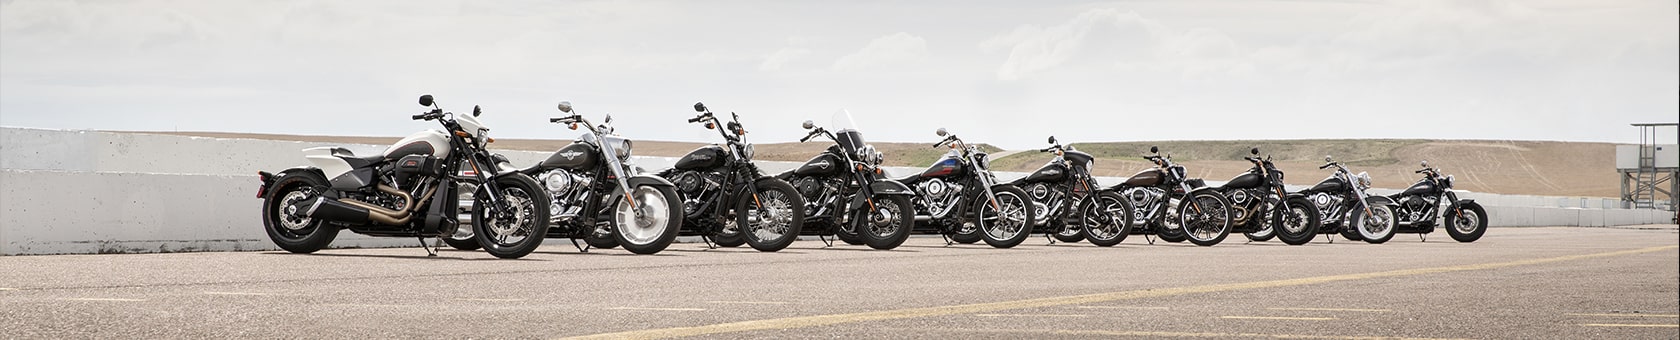 Image of 2019 line-up of Harley Motorcycles